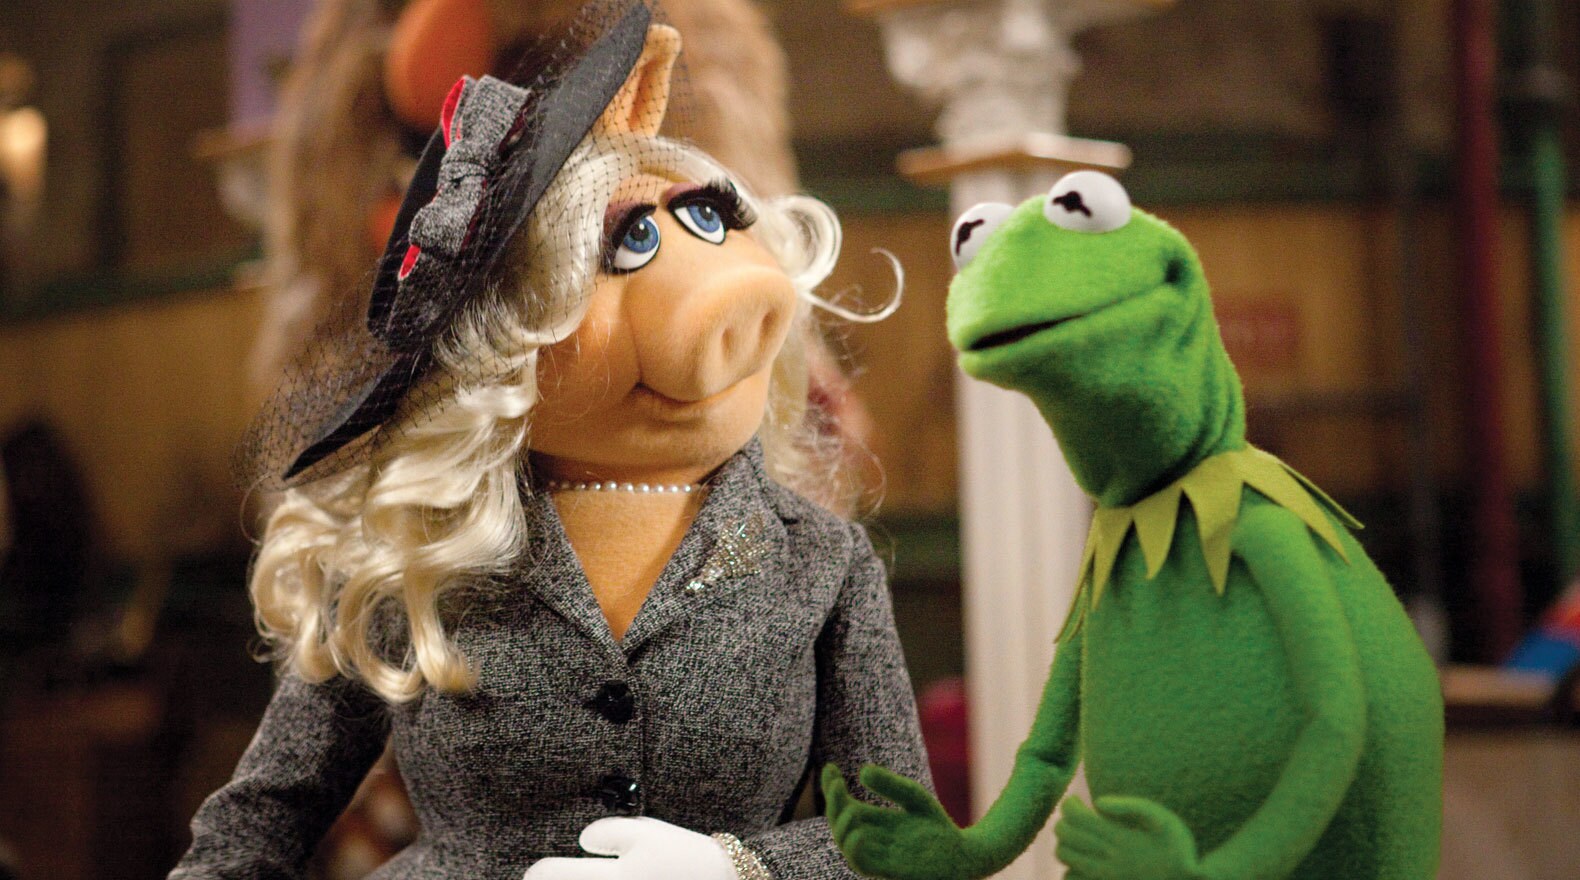 Miss Piggy is flustered by Kermit